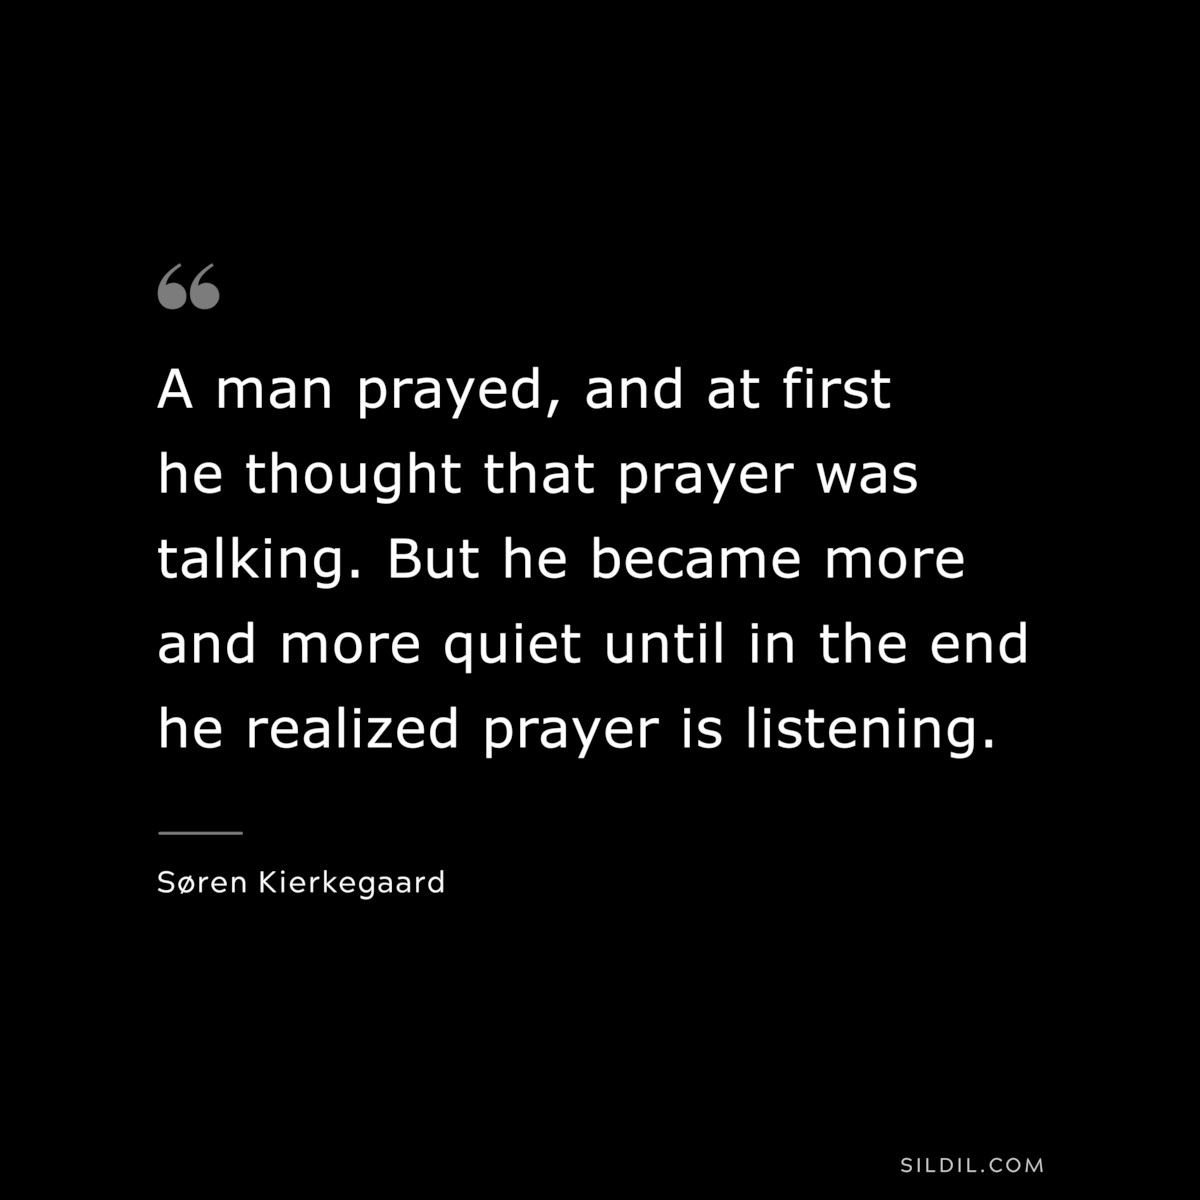 A man prayed, and at first he thought that prayer was talking. But he became more and more quiet until in the end he realized prayer is listening. ― Søren Kierkegaard